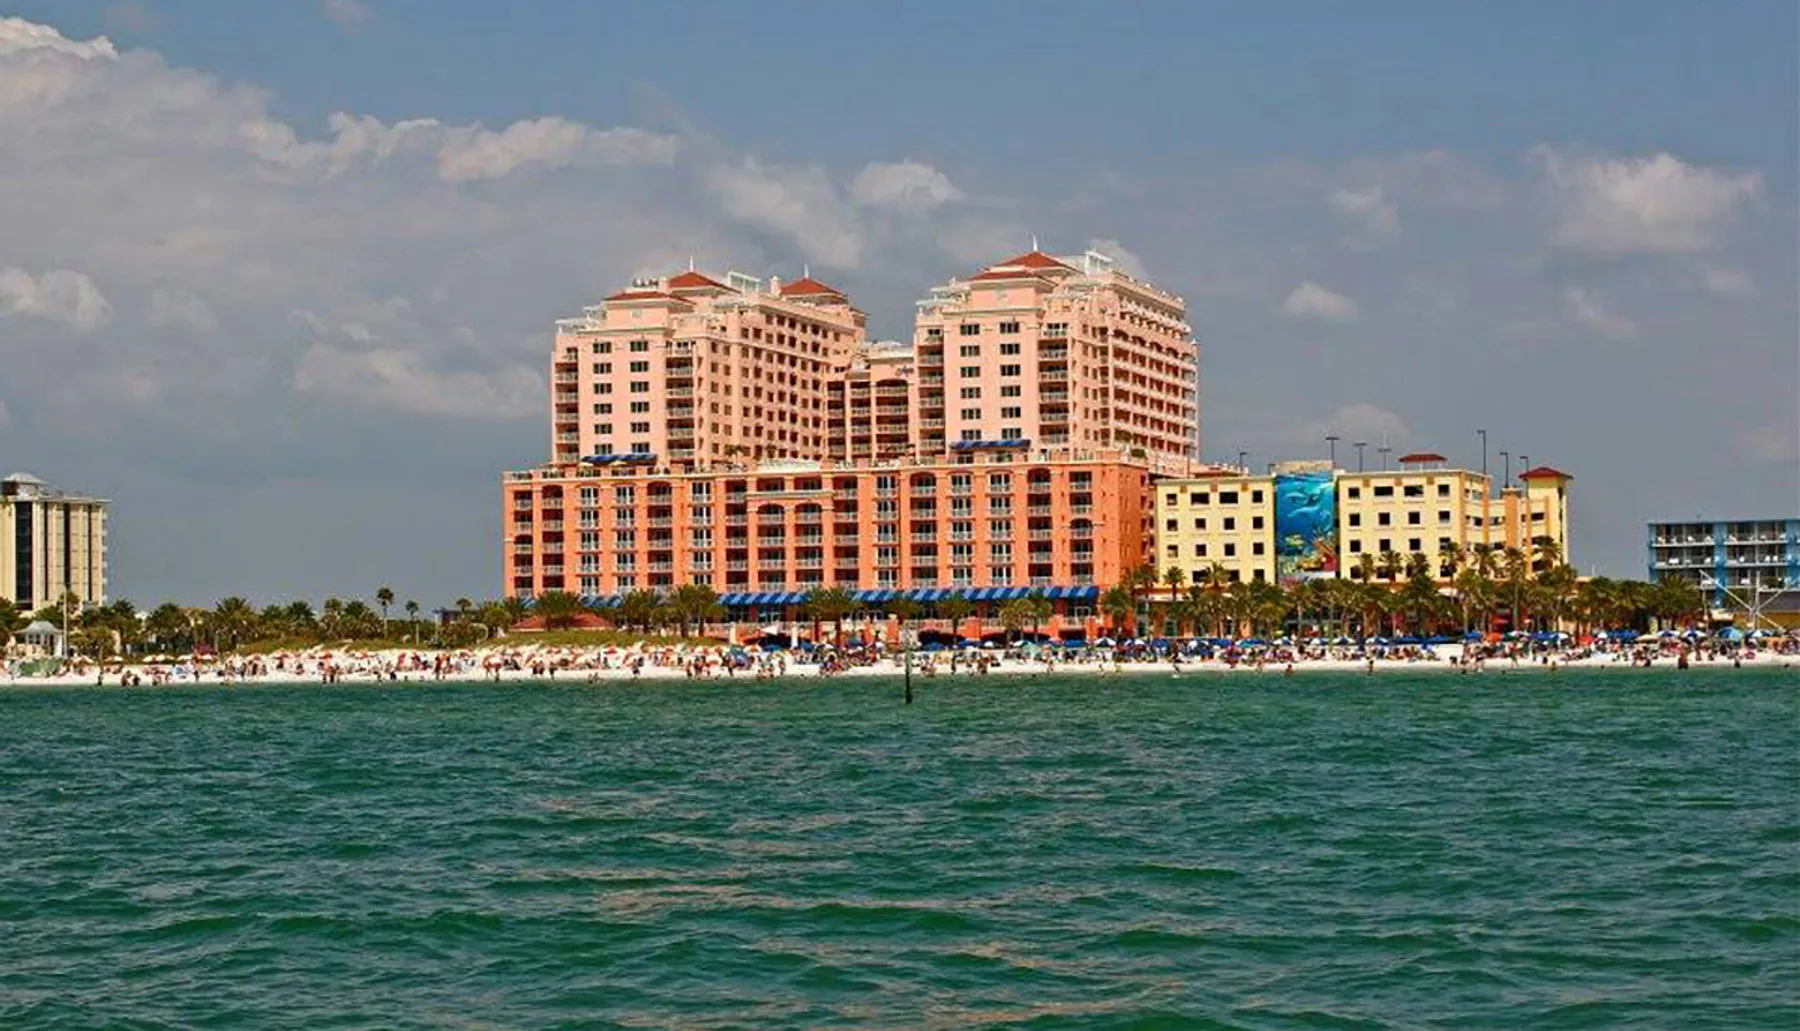 The image shows a vibrant beachfront lined with colorful buildings and a bustling beach crowd under a partly cloudy sky.